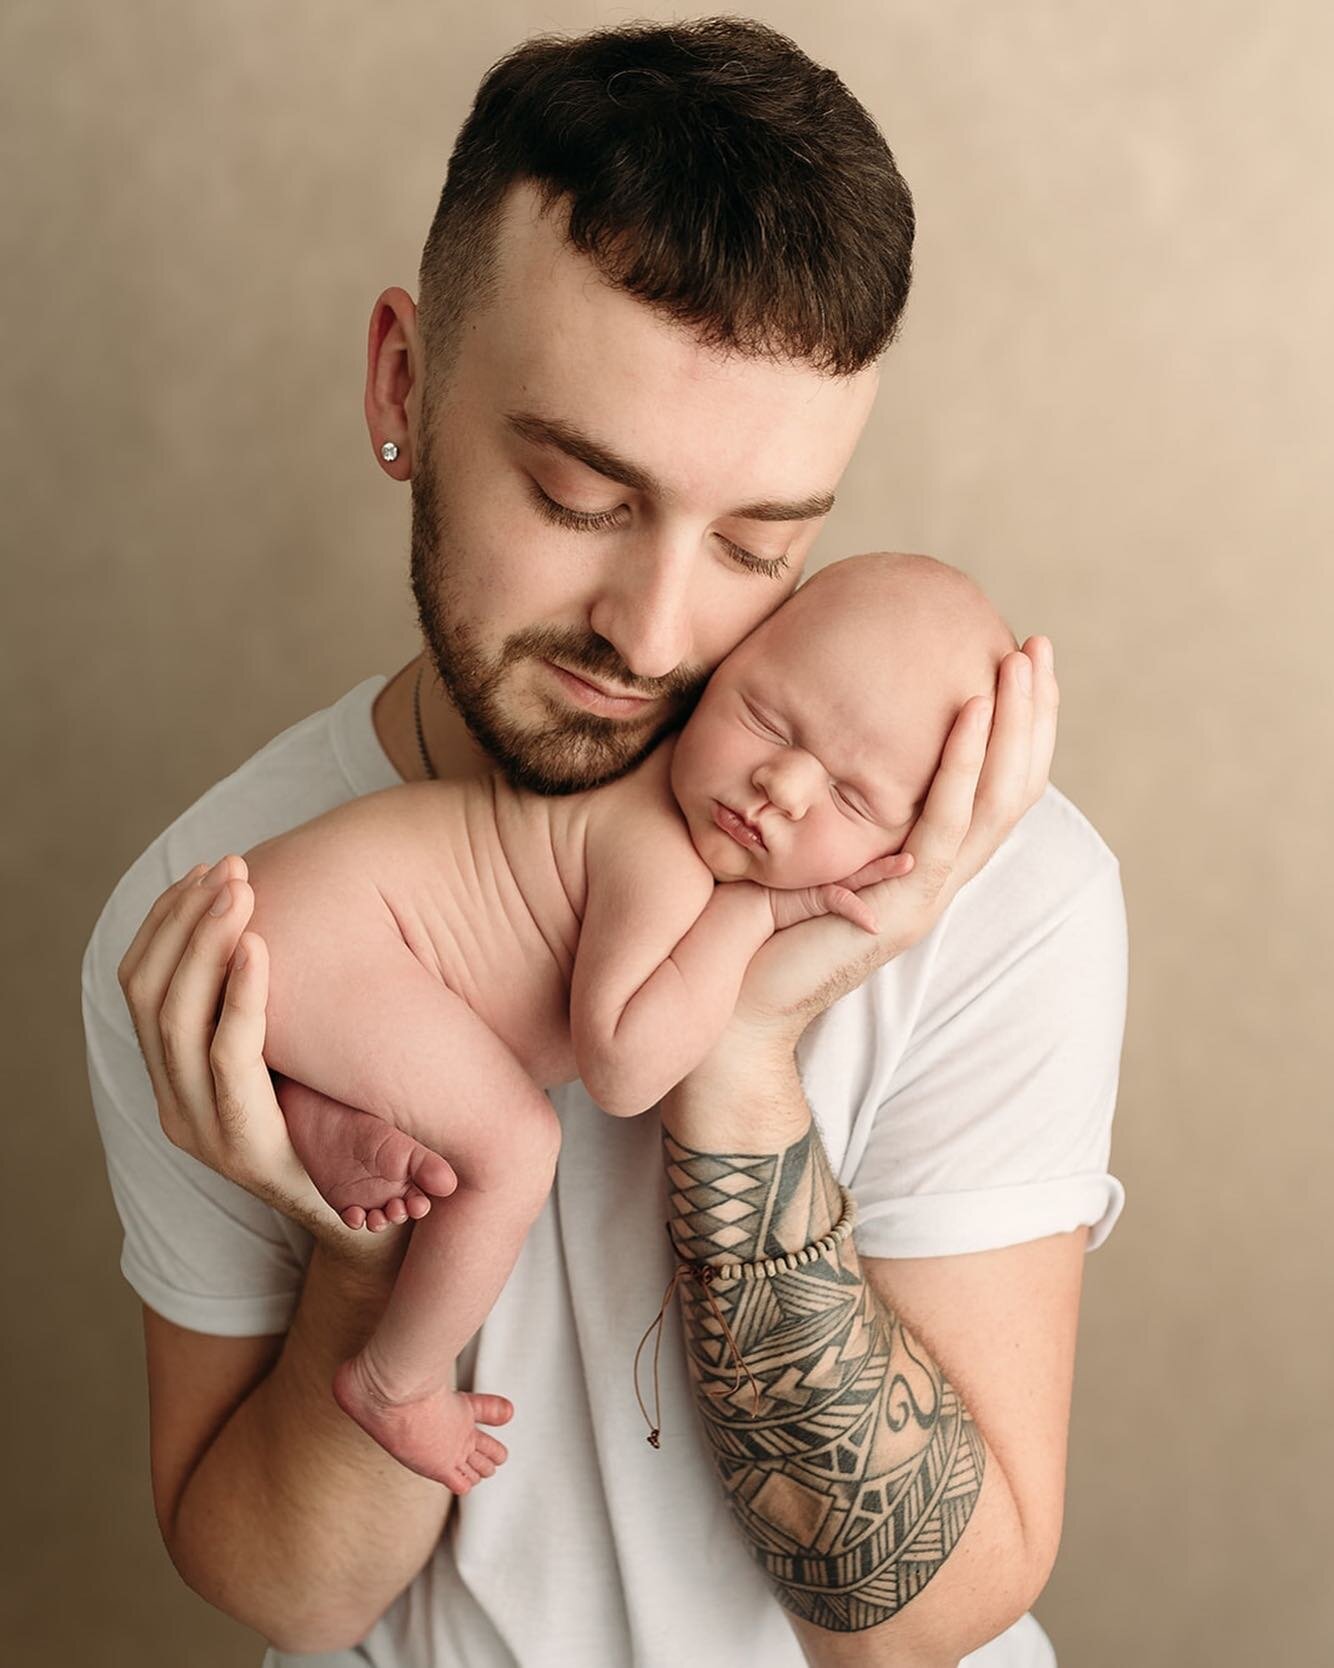 A brand new father and his son 💙

✨BOOKING INTO FEBRUARY 2022
LIMITED AVAILABILITY SEPTEMBER-JANUARY✨
⬇️⬇️⬇️⬇️⬇️⬇️⬇️⬇️⬇️
www.haleybphoto.com

.
.
.

#charlestonwvnewbornphotographer #parkersburgwvnewbornphotographer #huntingtonwvnewbornphotographer 